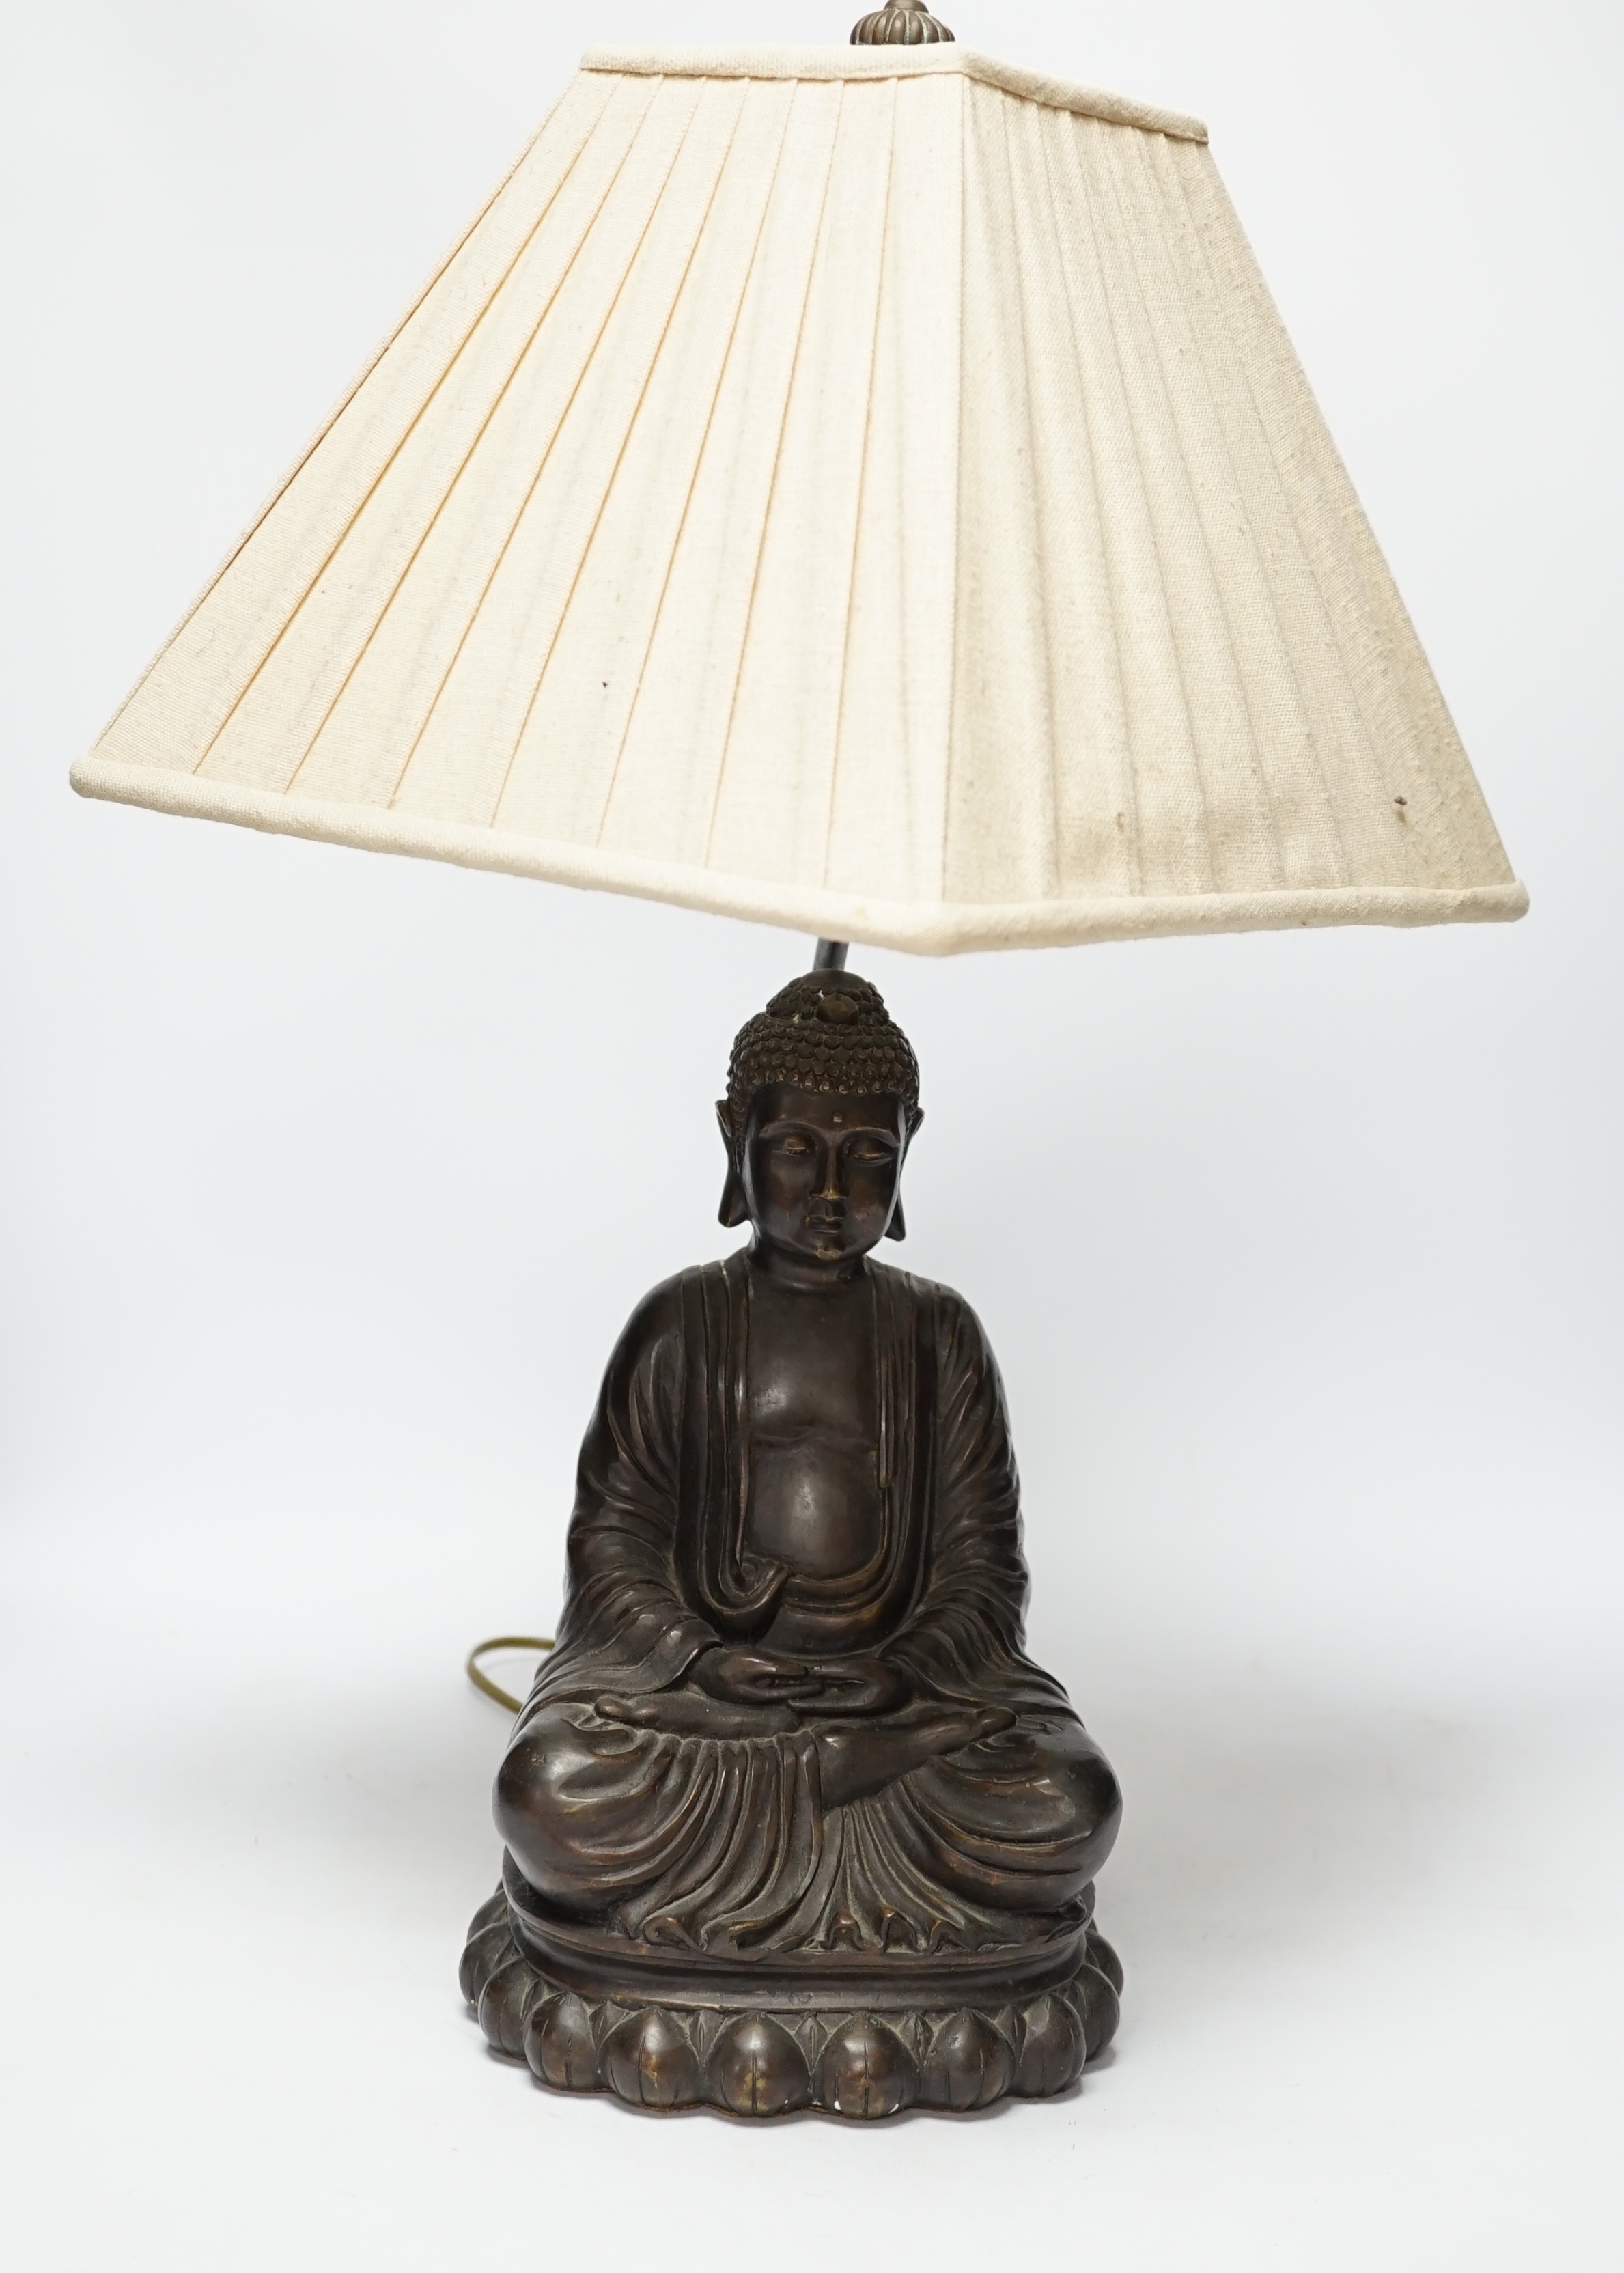 A bronzed Buddha table lamp, 57cm high including shade